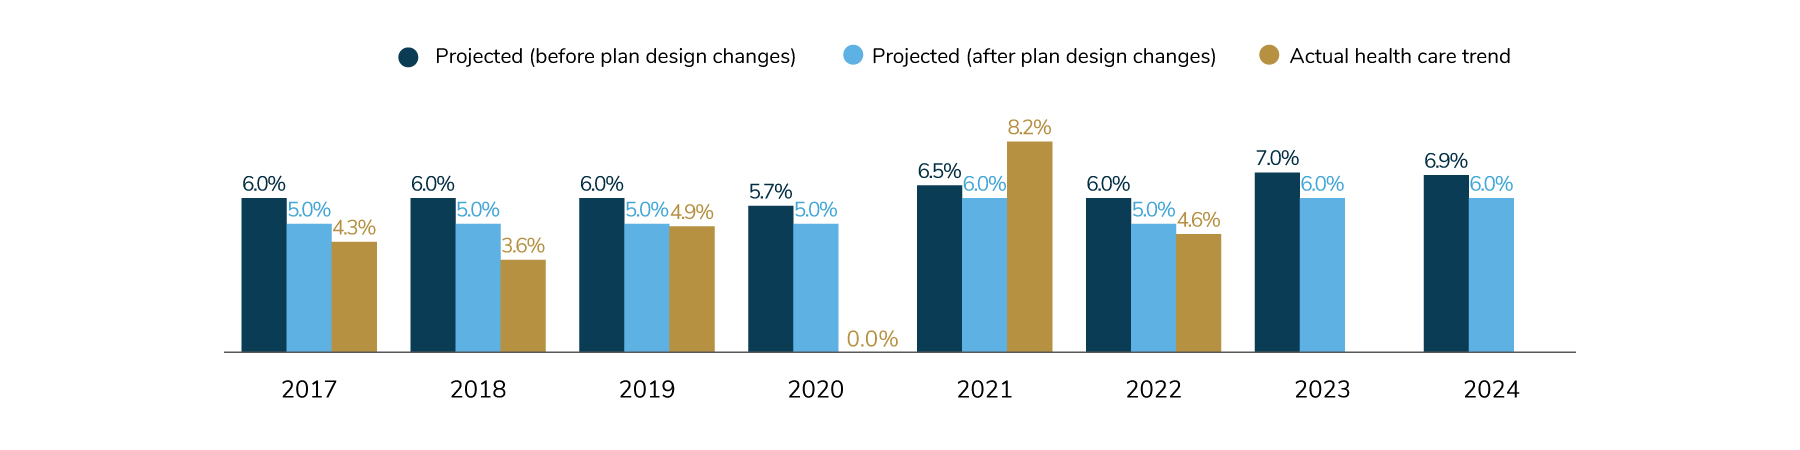 Actual health care trend was 4.6% for 2022, after two years of fluctuating trend (0% in 2020 and 8.2% in 2021). Employers are projecting 7.0% trend for 2023 (6.0% after plan design changes) and 6.9% for 2024 (6.0% after plan design changes).